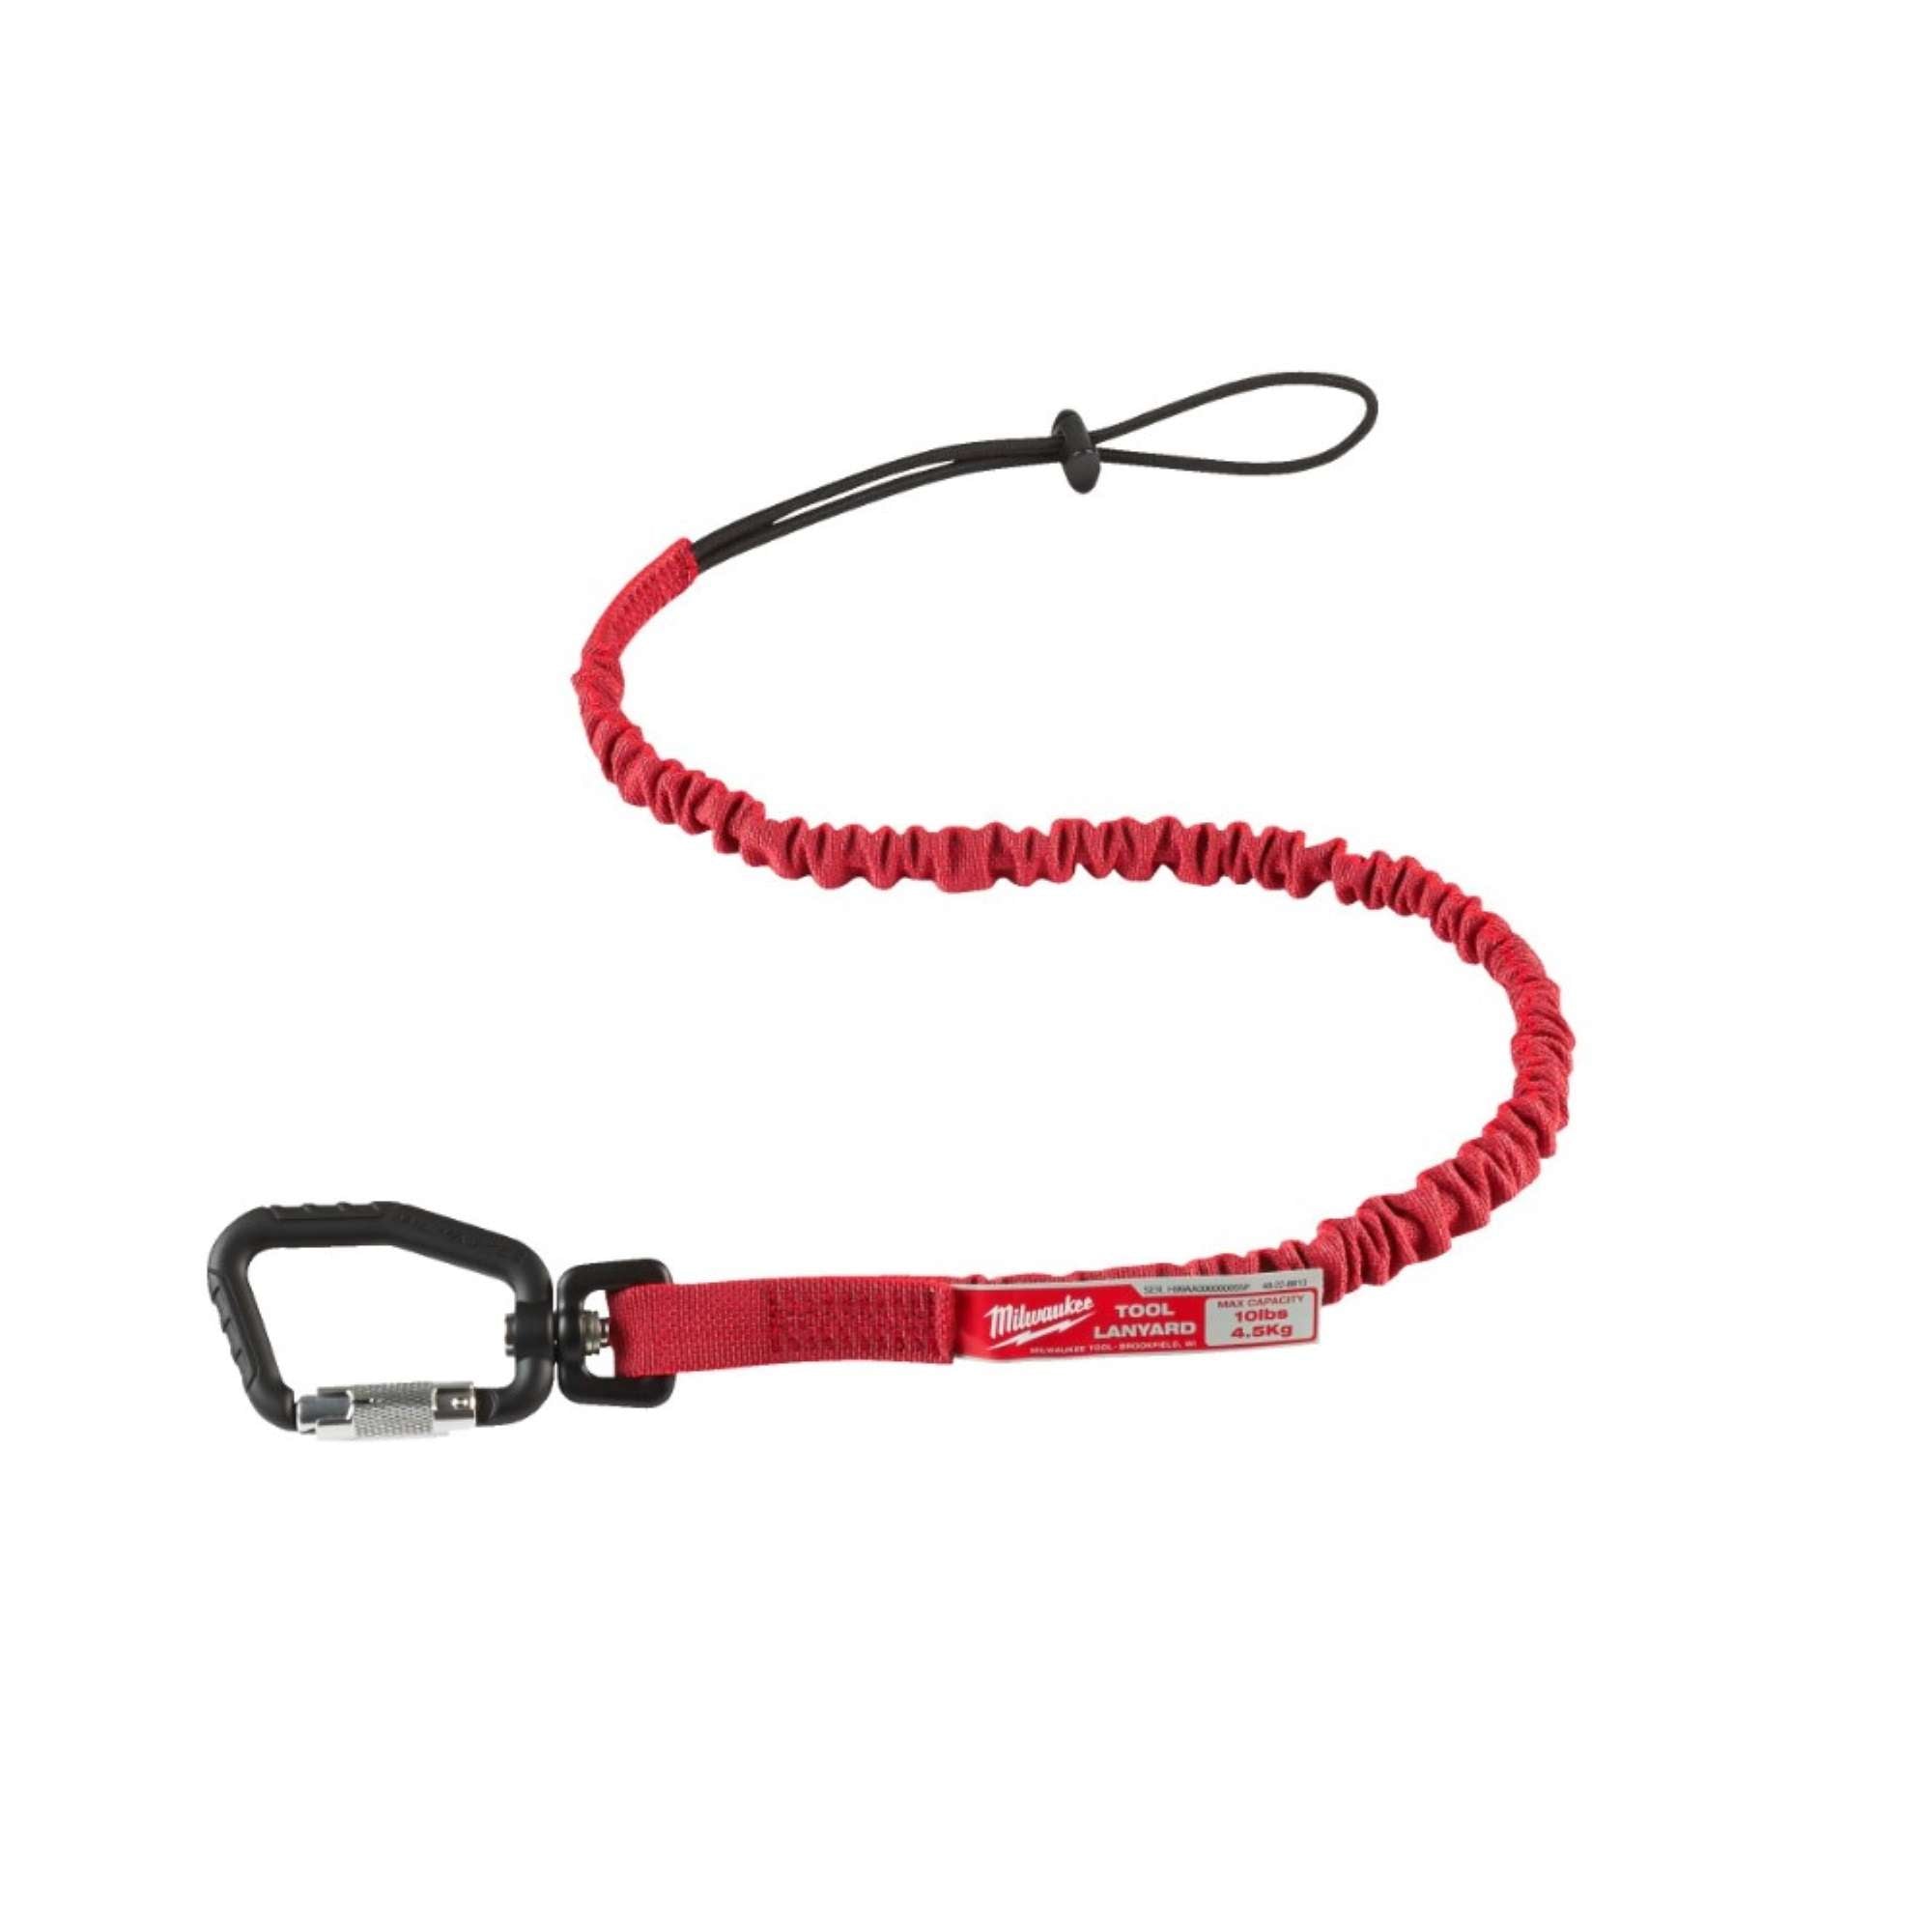 FALL PROTECTION LACE 4.5 KG MILWAUKEE 4932471351